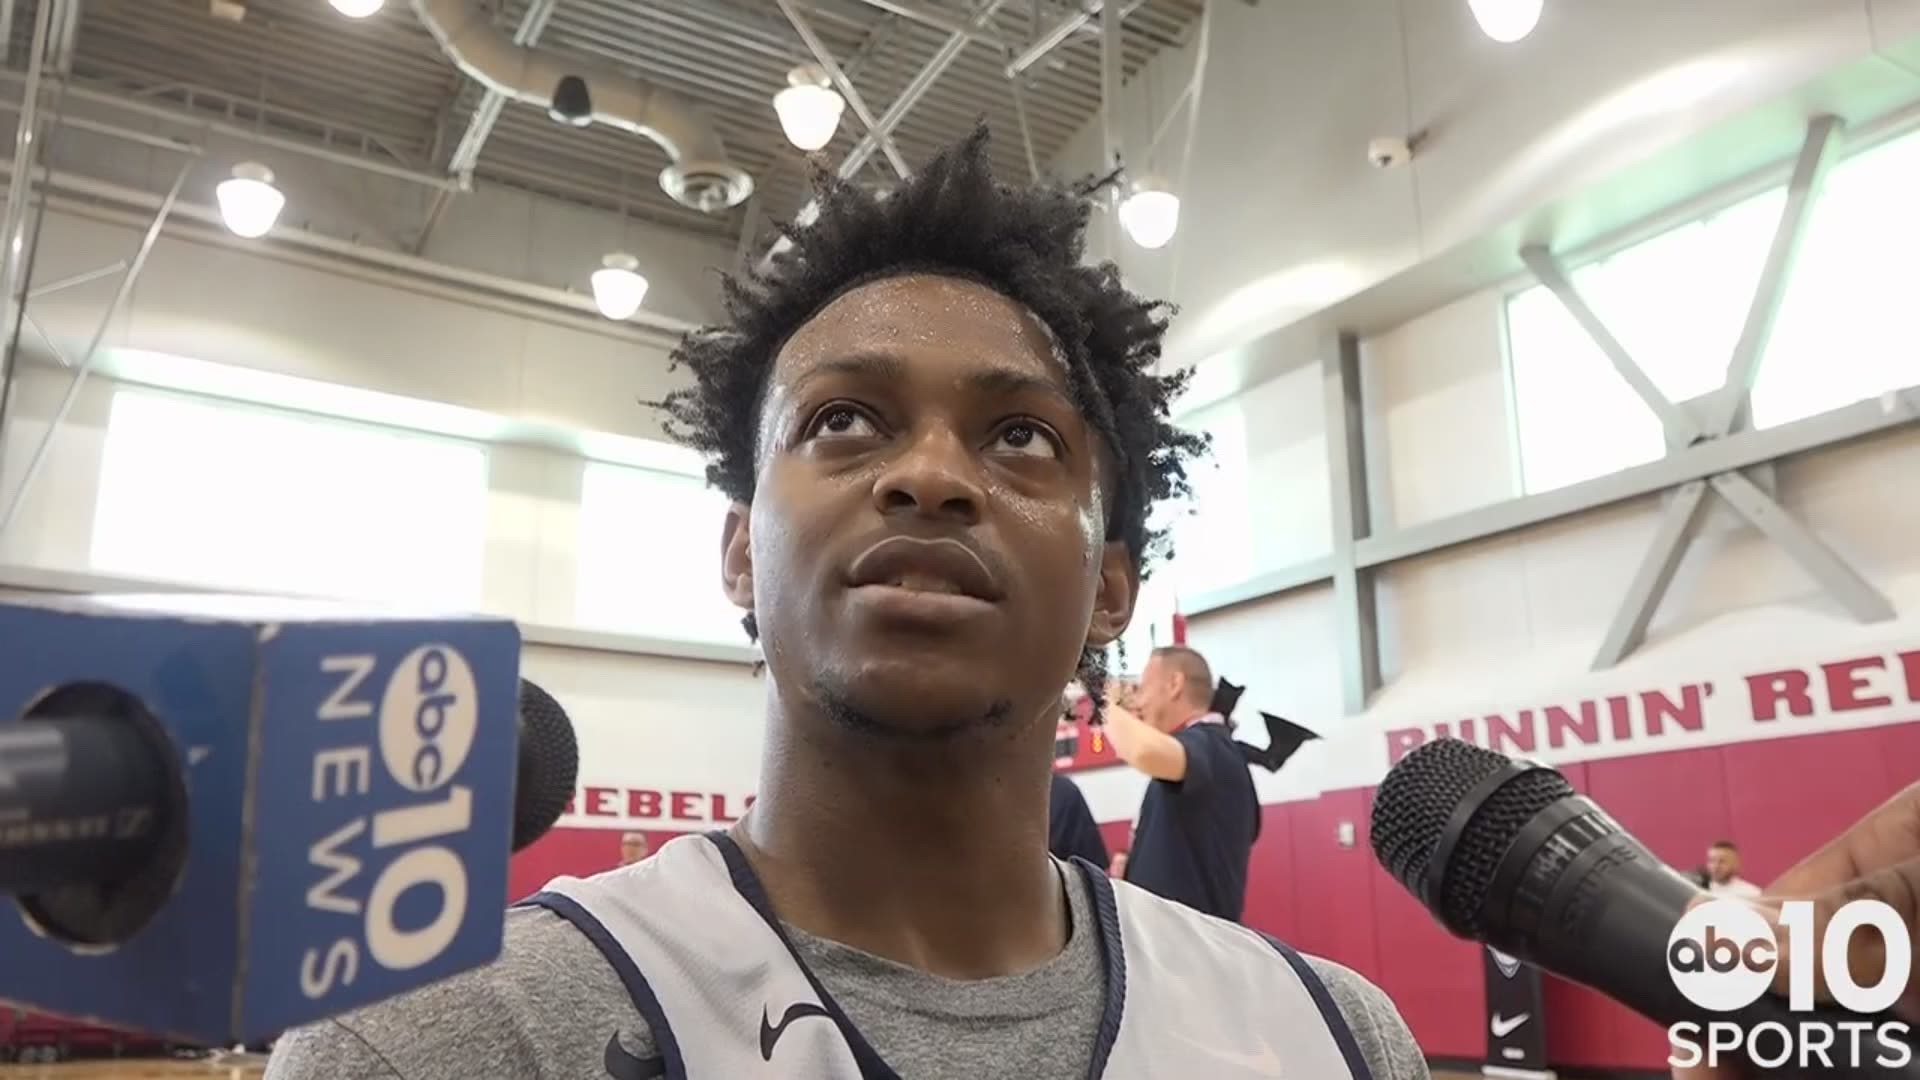 As USA Basketball training camp concludes in Las Vegas on Thursday, De'Aaron Fox talks to ABC10's Sean Cunningham about his hopes of making the final Team USA roster for the FIBA World Cup, his experience with Gregg Popovich, the offseason of his Sacramento Kings and the expectations for the new season.